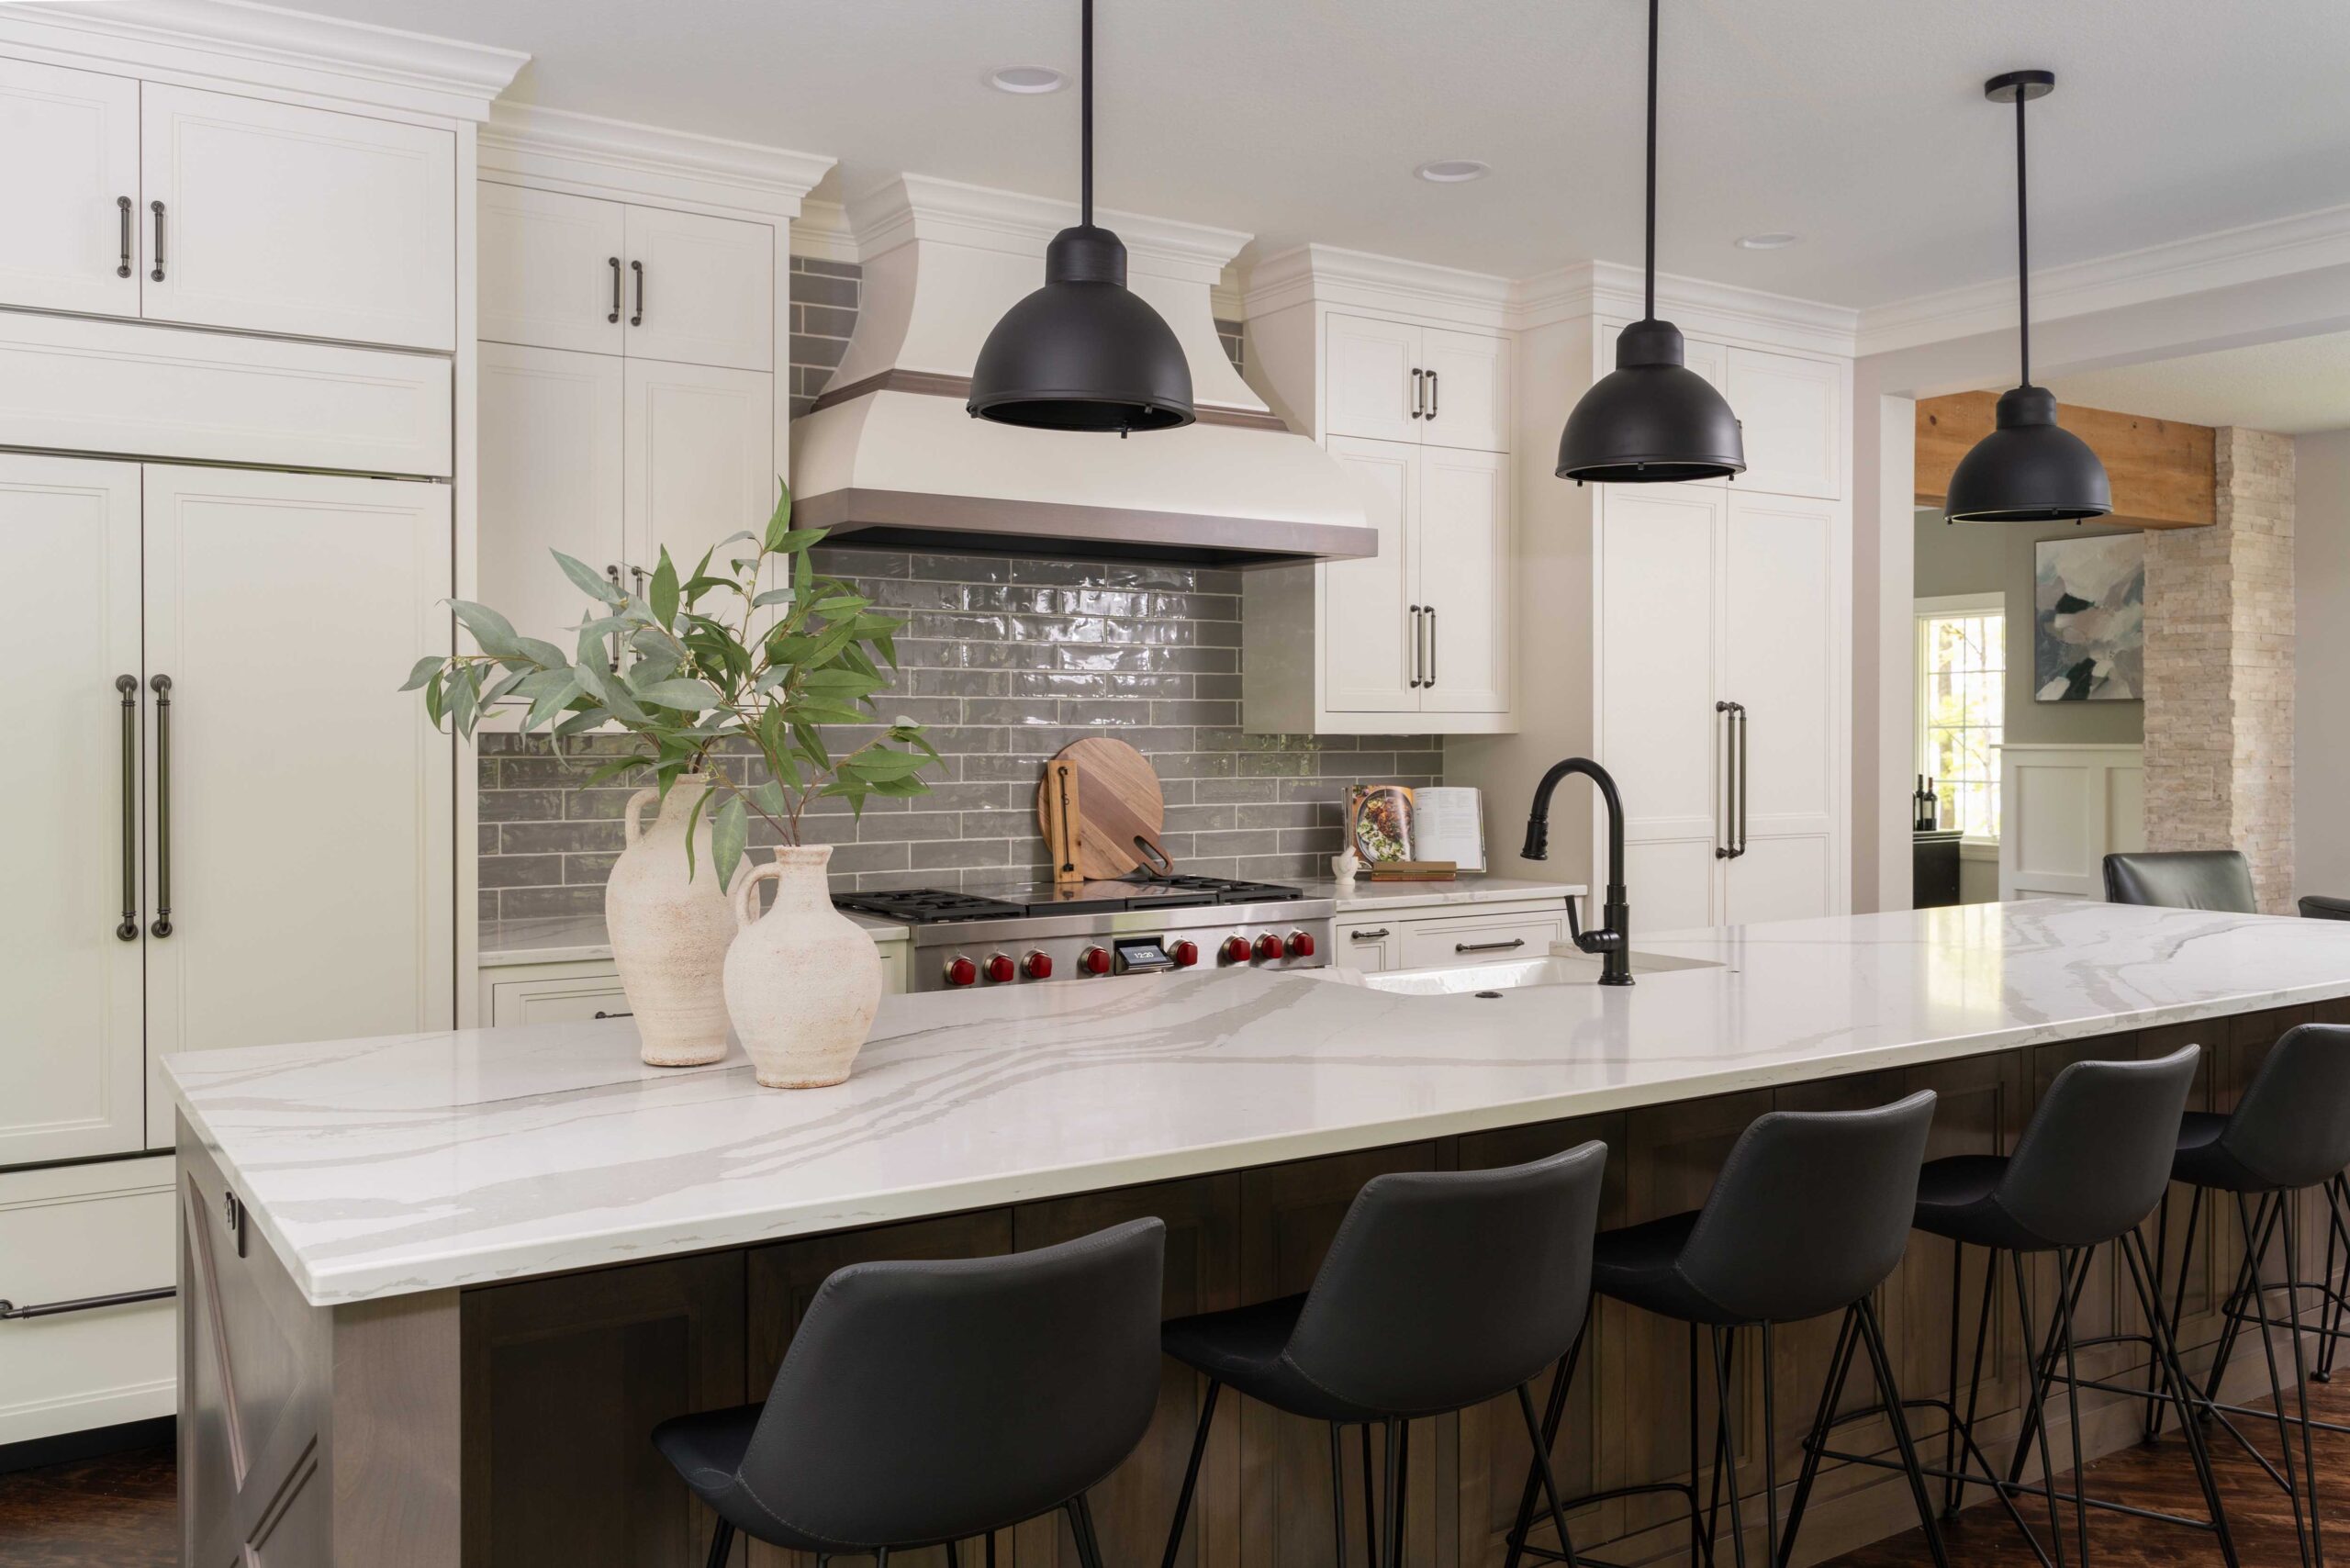 A Great Waters Alcove kitchen remodel featuring a center island and black stools.